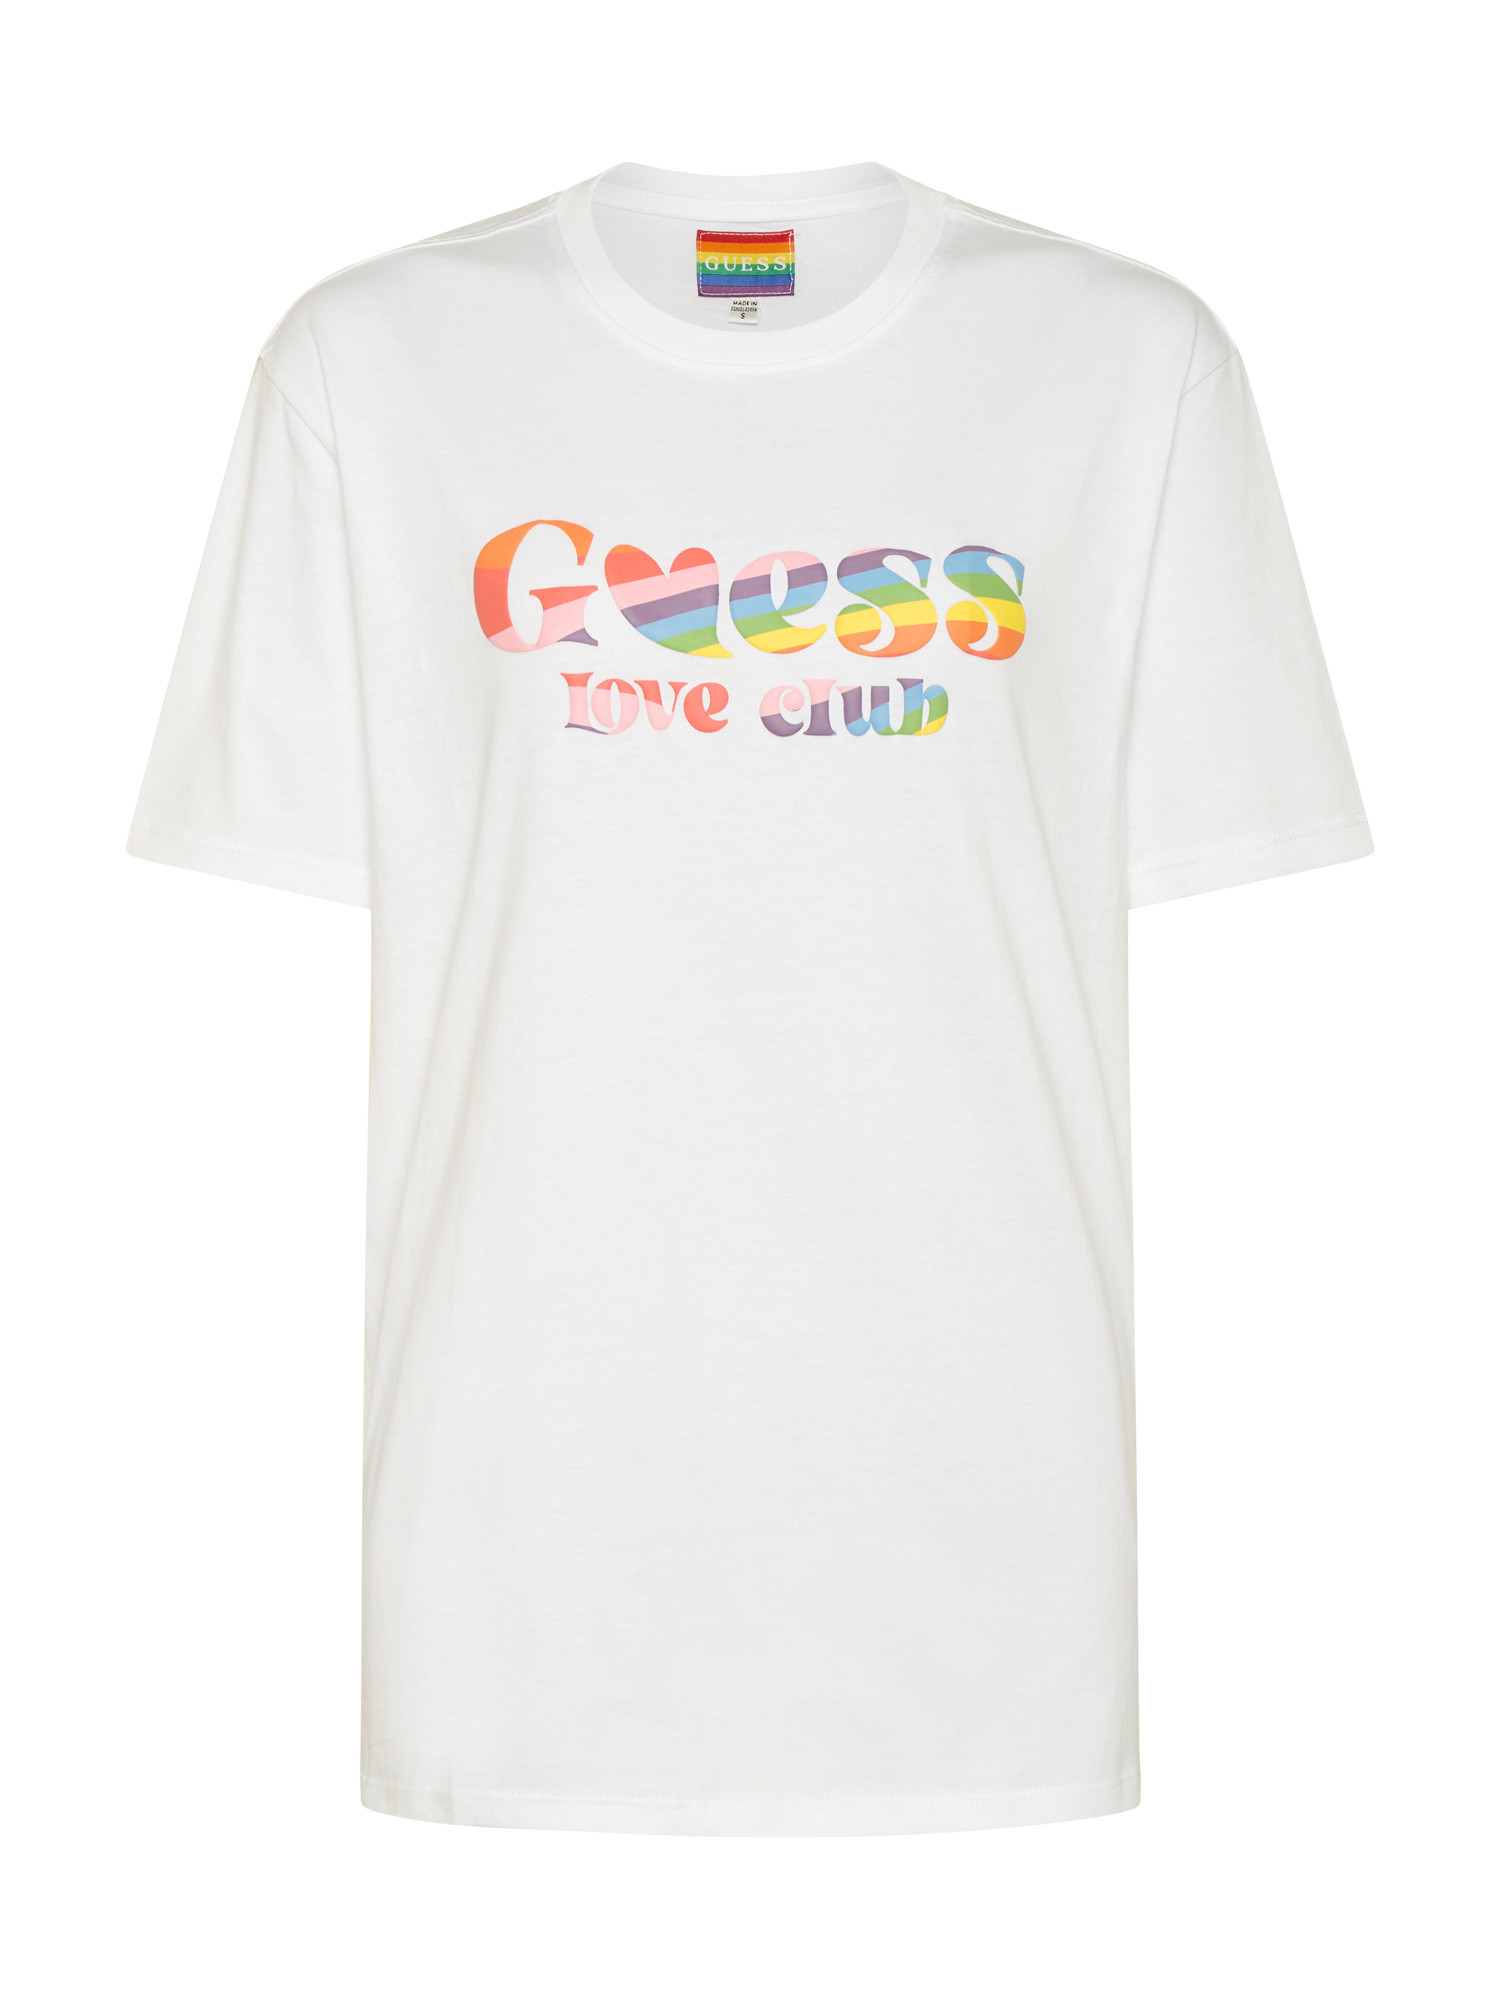 Guess - T-shirt with logo, White, large image number 0